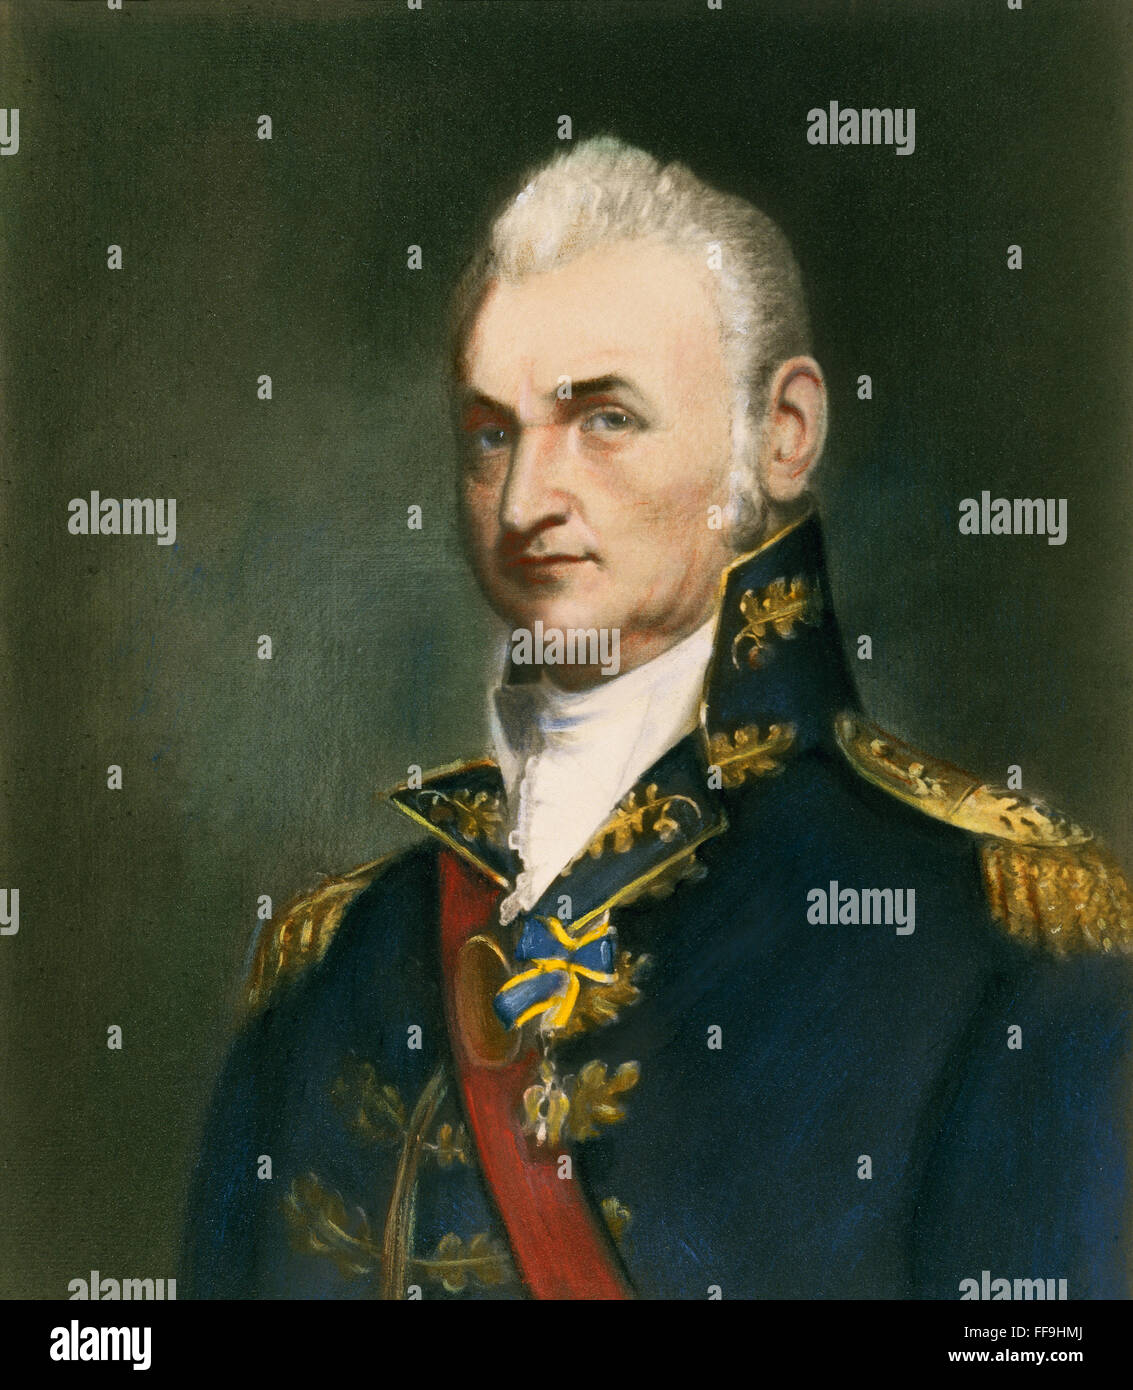 HENRY DEARBORN (1751-1829). /nAmerican army officer and politician. As a major general in the War of 1812. Oil on canvas after Gilbert Stuart. Stock Photo